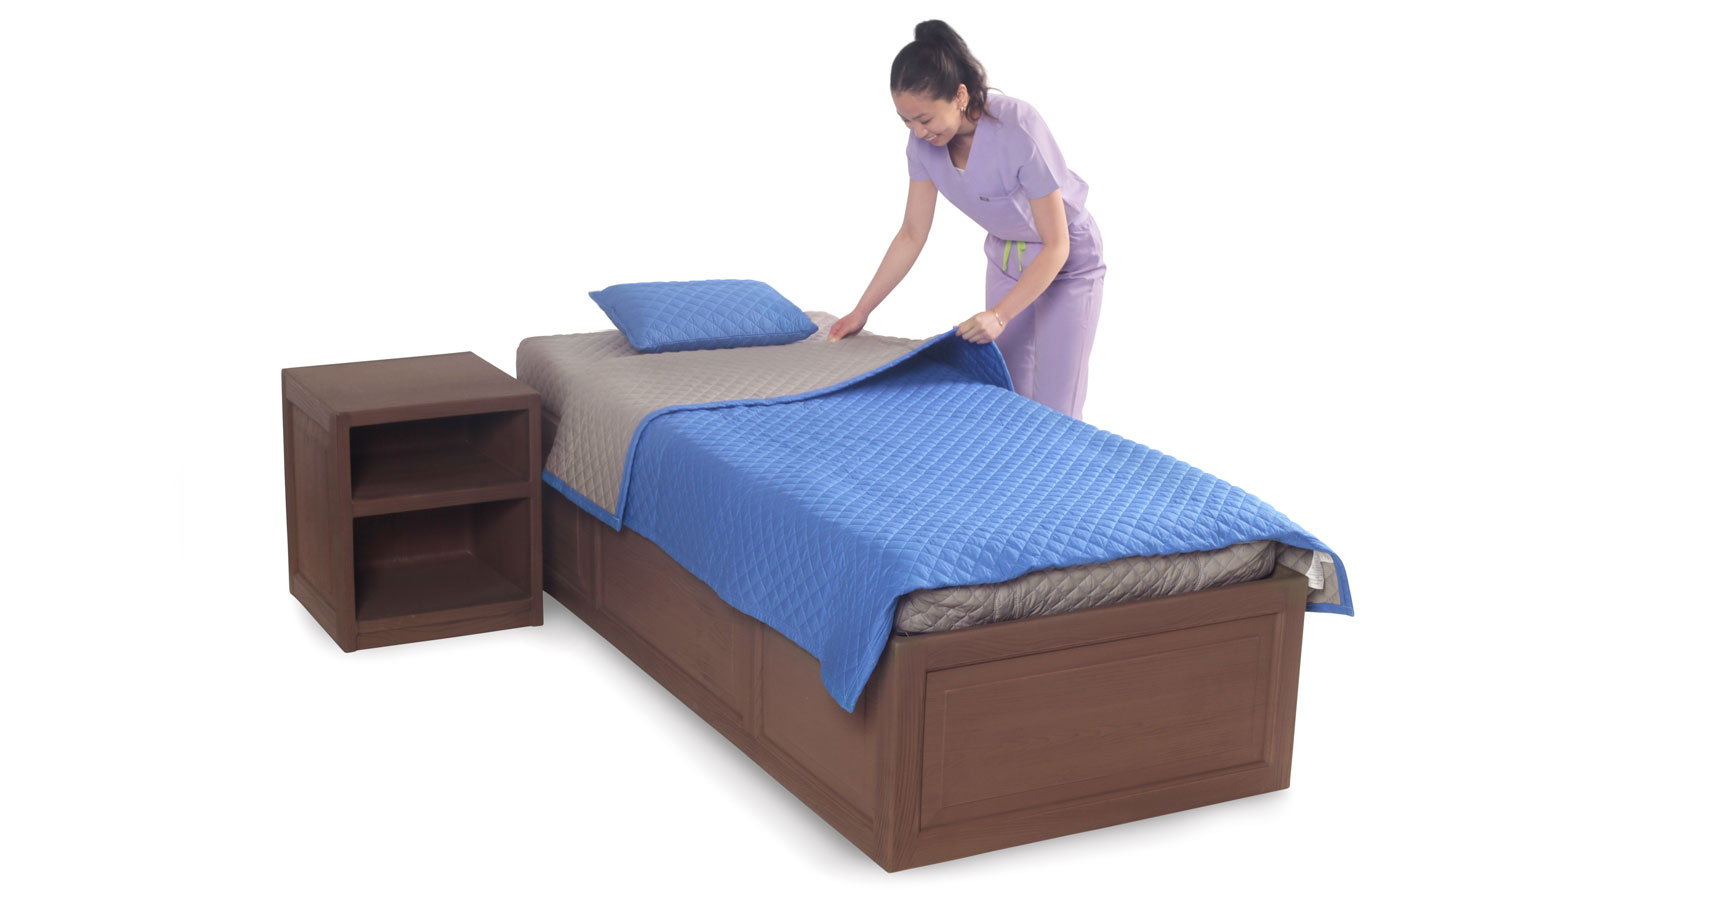 Girl making bed, featuring safety bedding in navy blue color